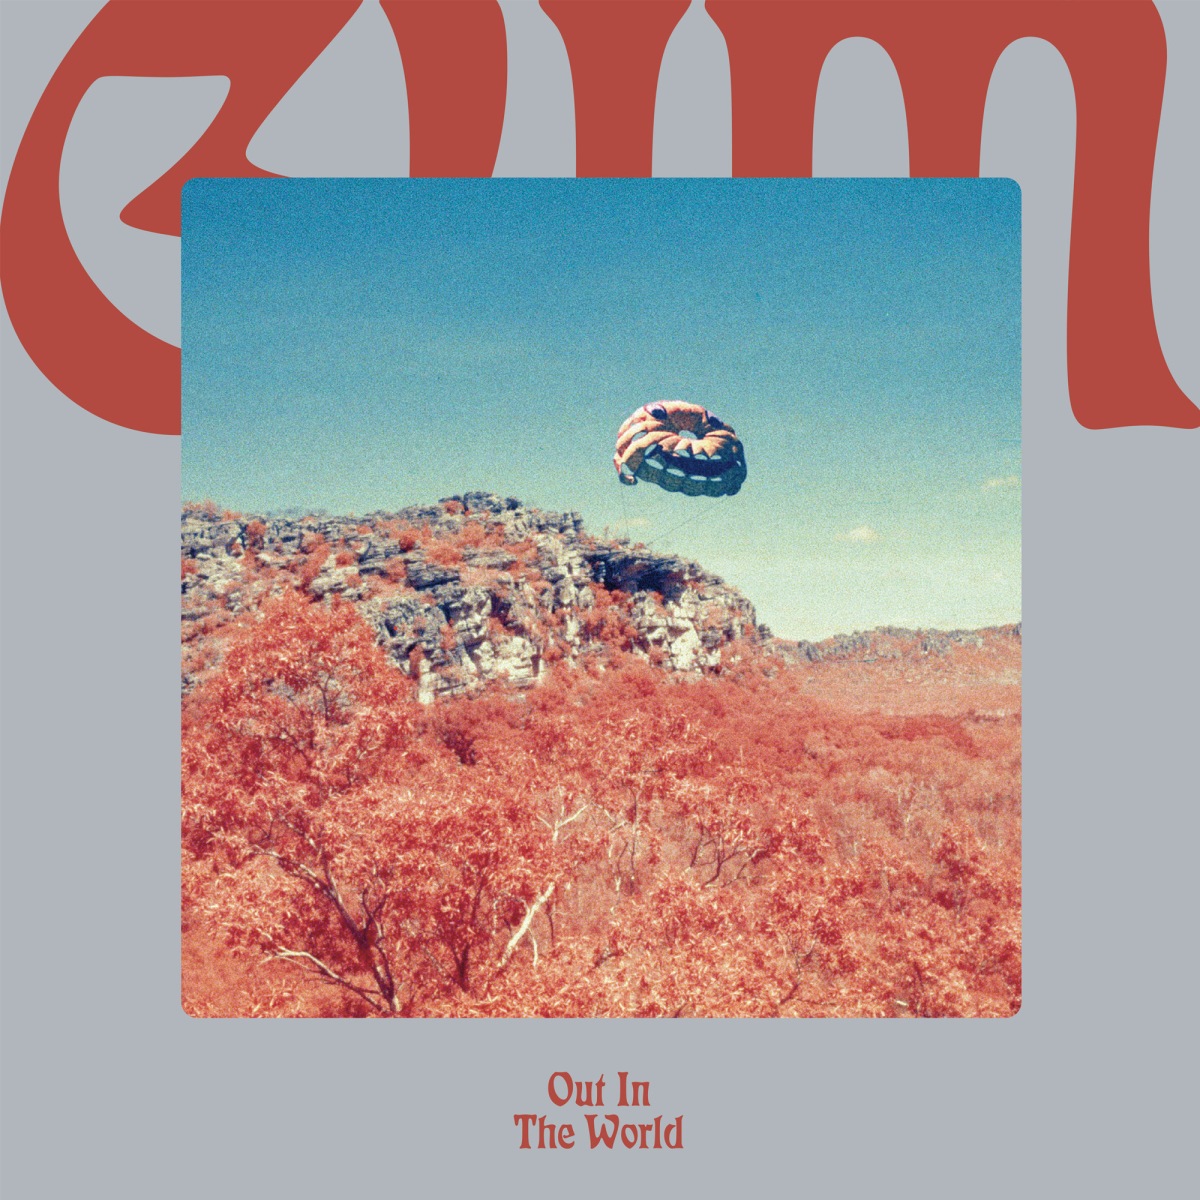 GUM – Out In The World Album Review